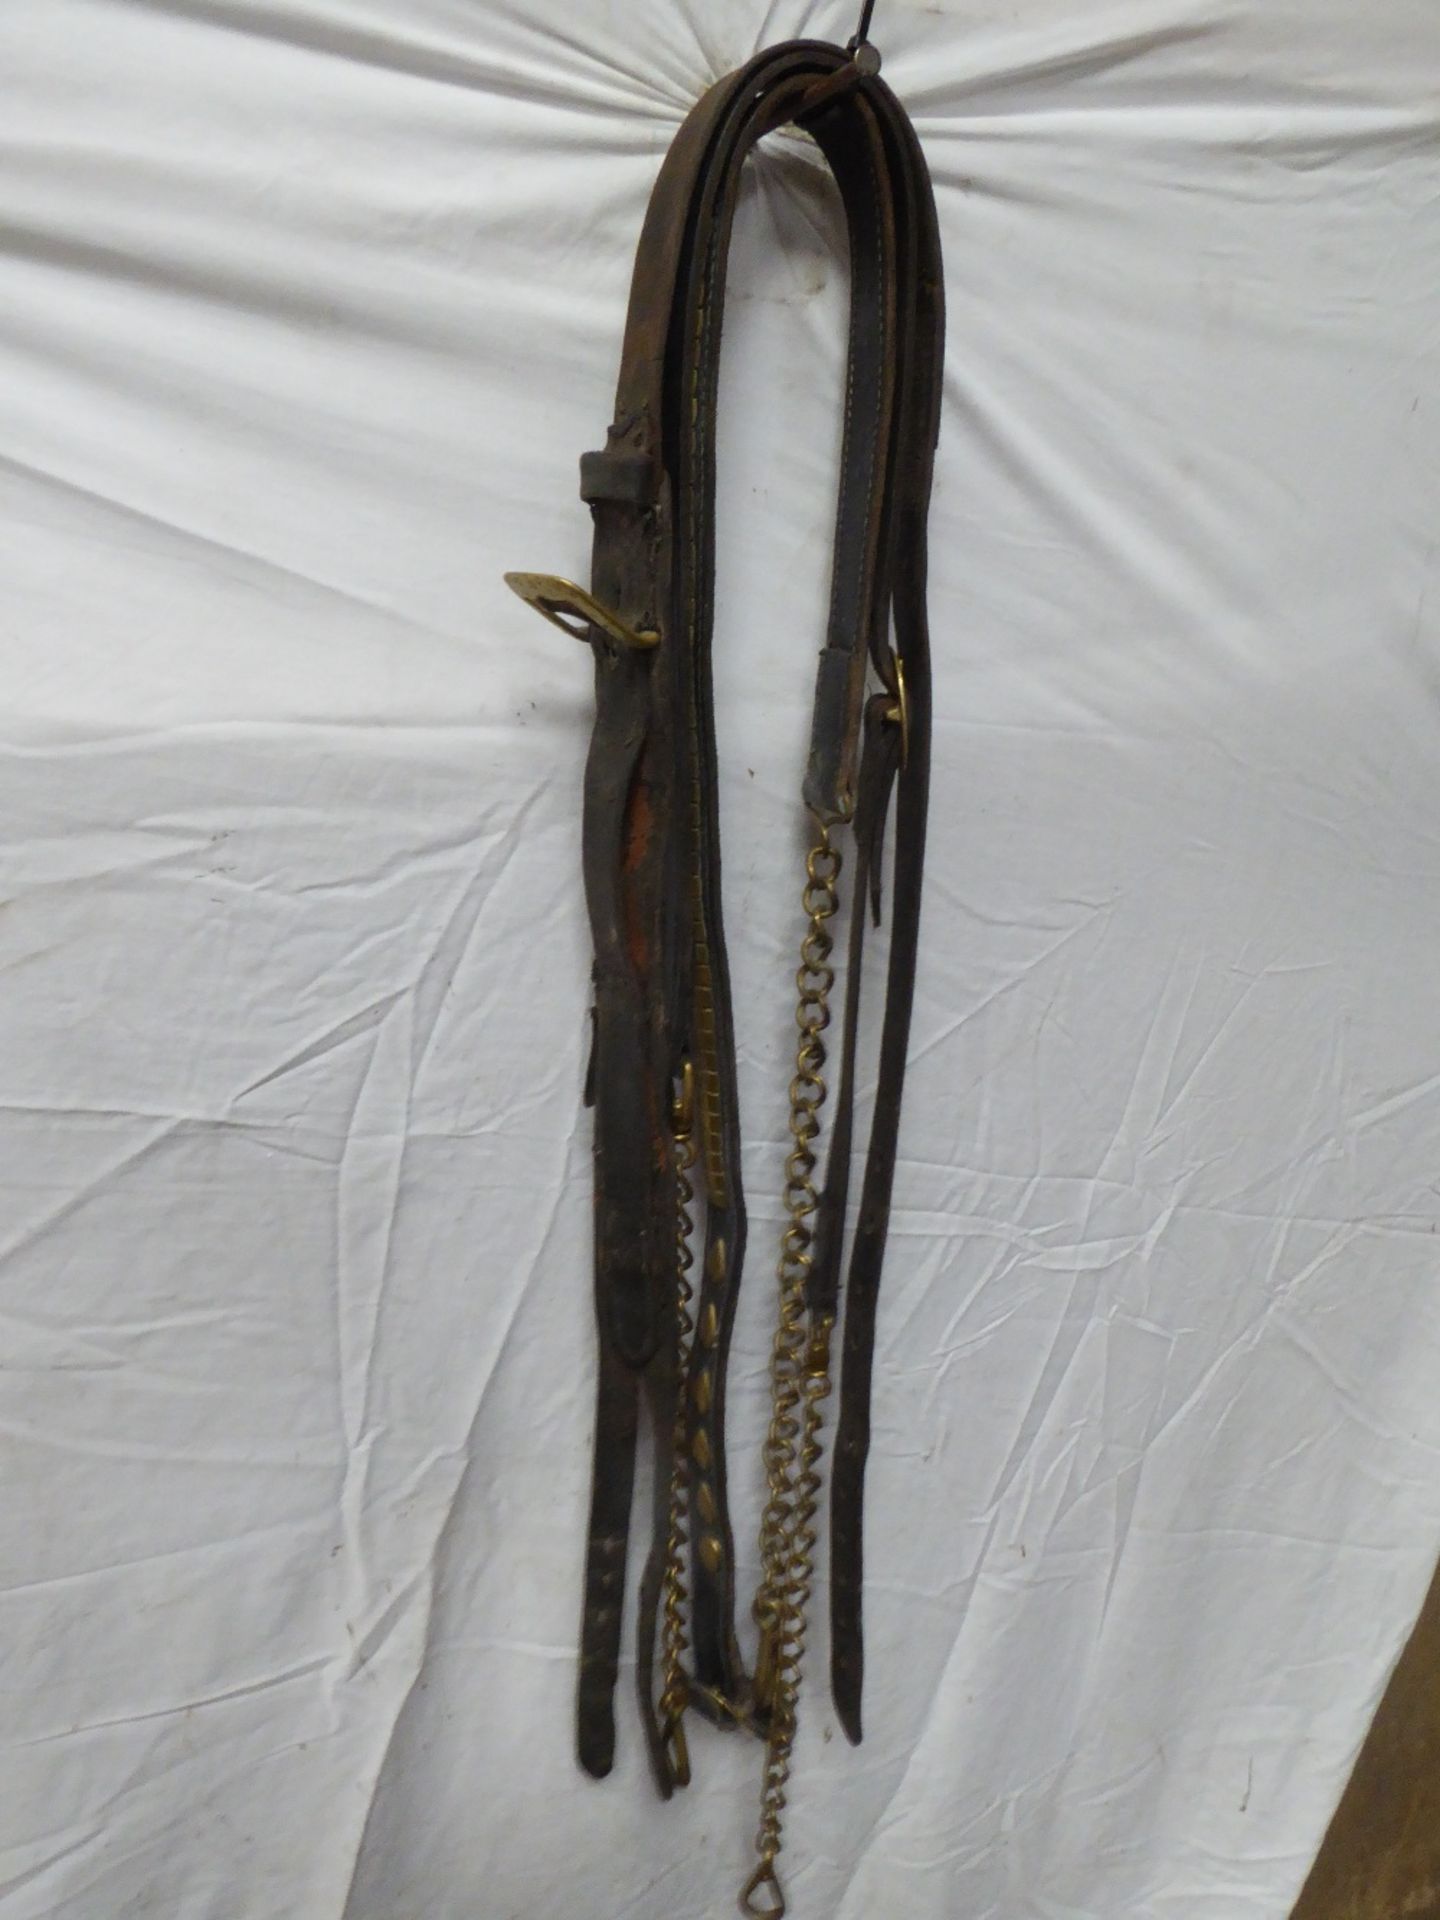 Pair of bearing reins and a back strap